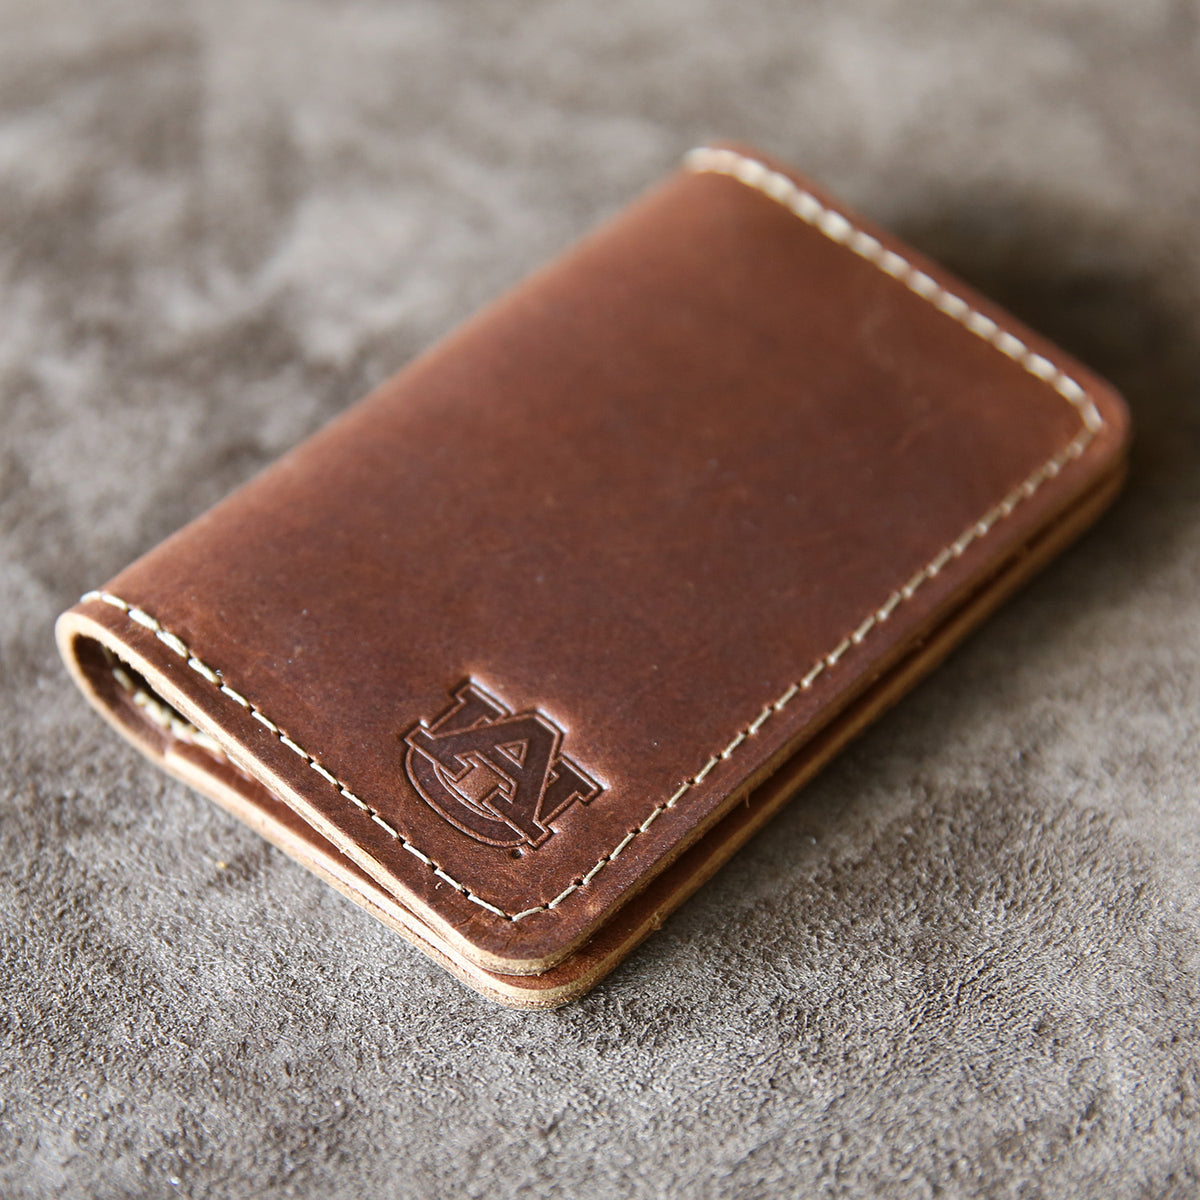 The Officially Licensed Auburn Vincent Fine Leather Business Card Holder Wallet BiFold